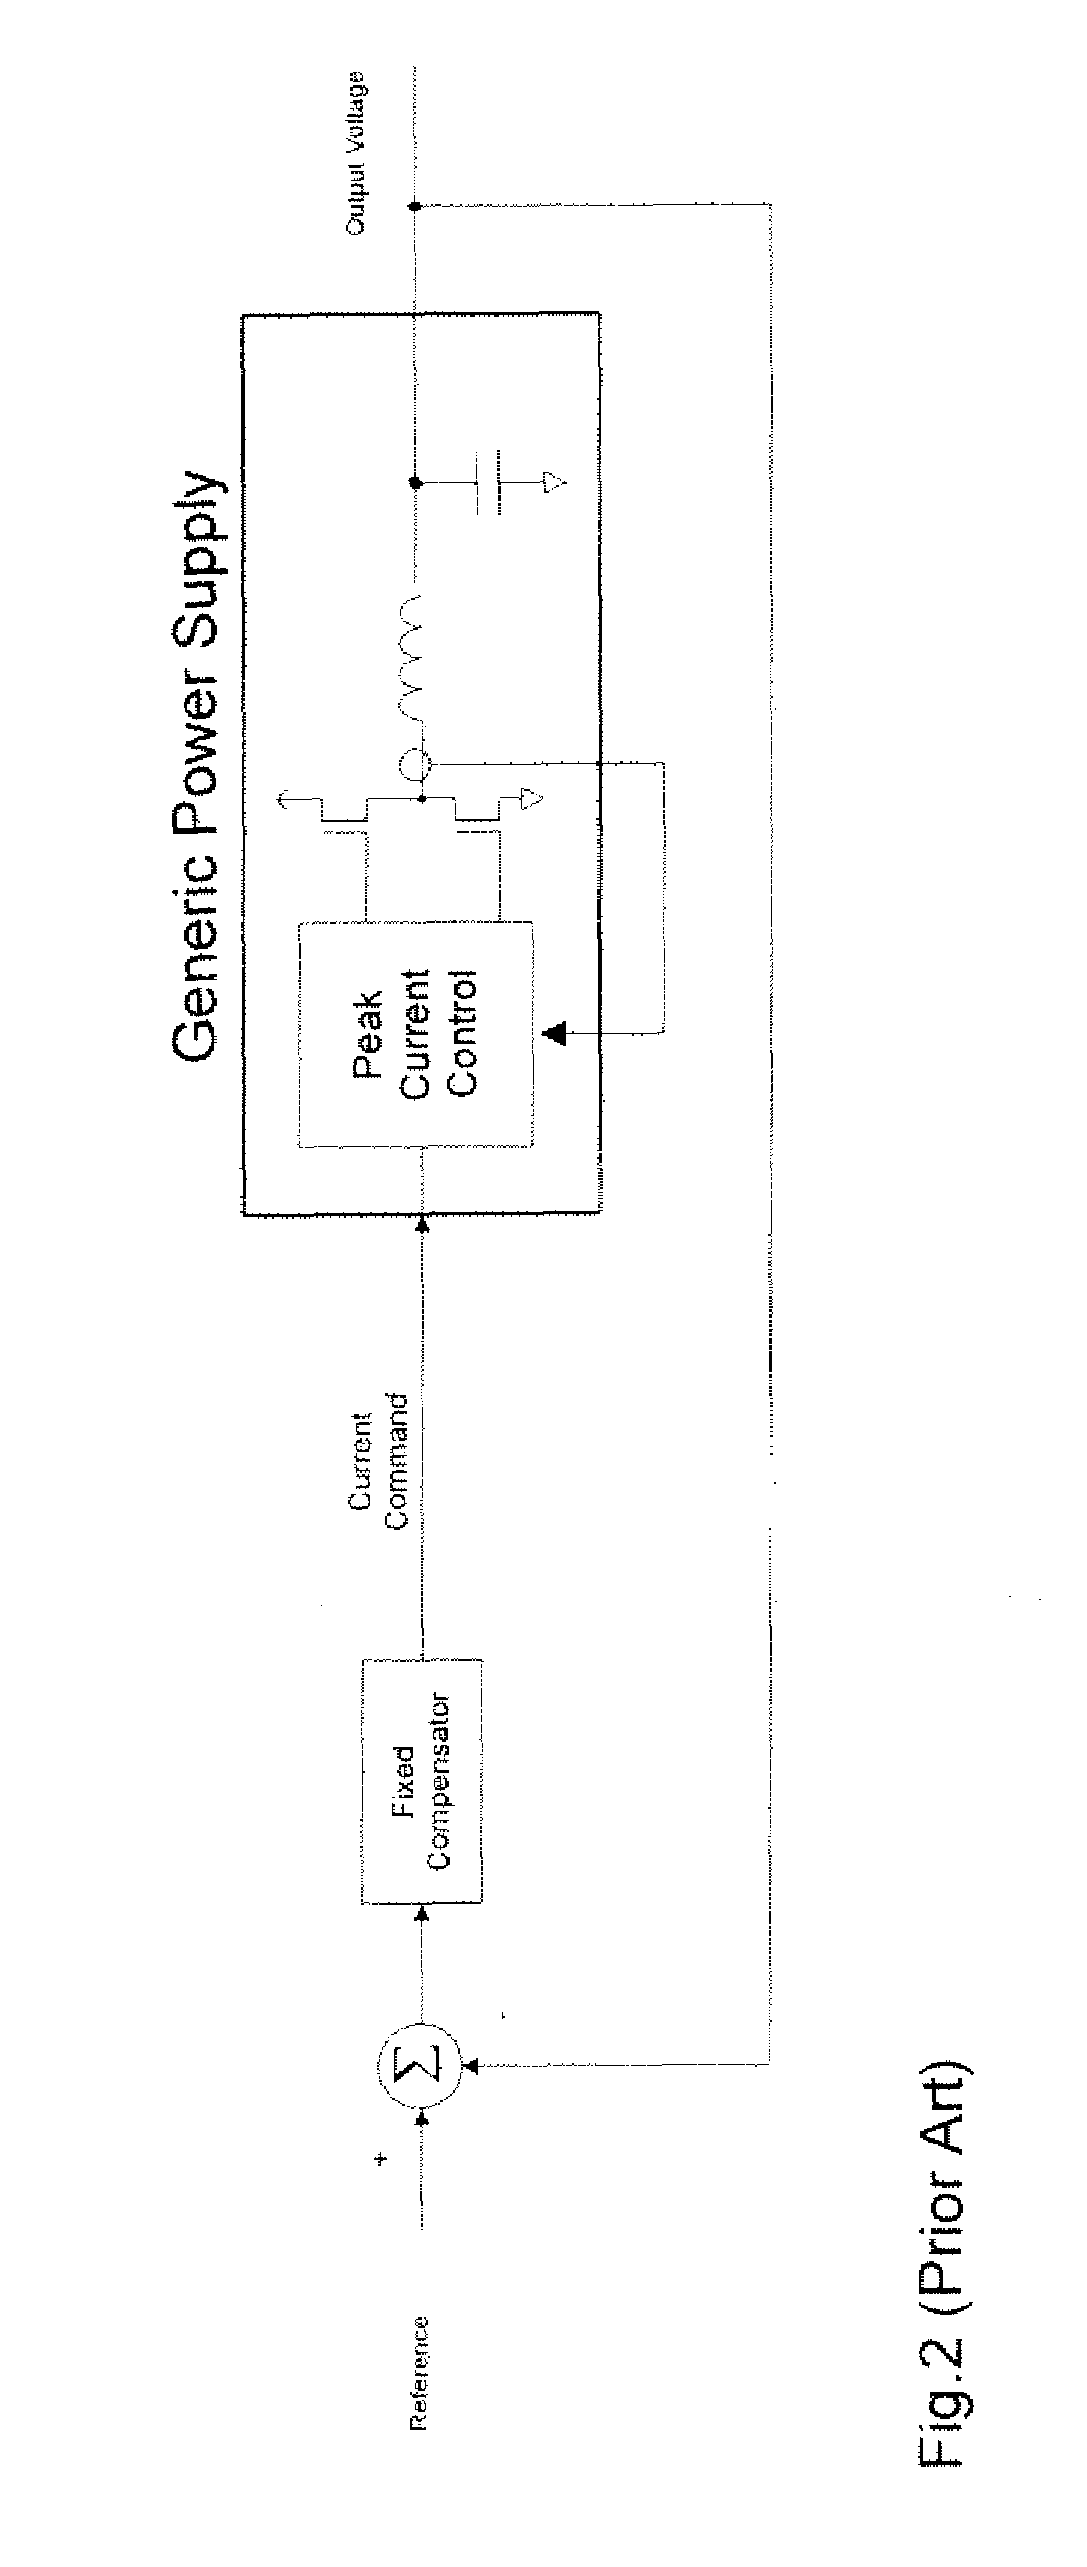 Non-linear controller for switching power supply